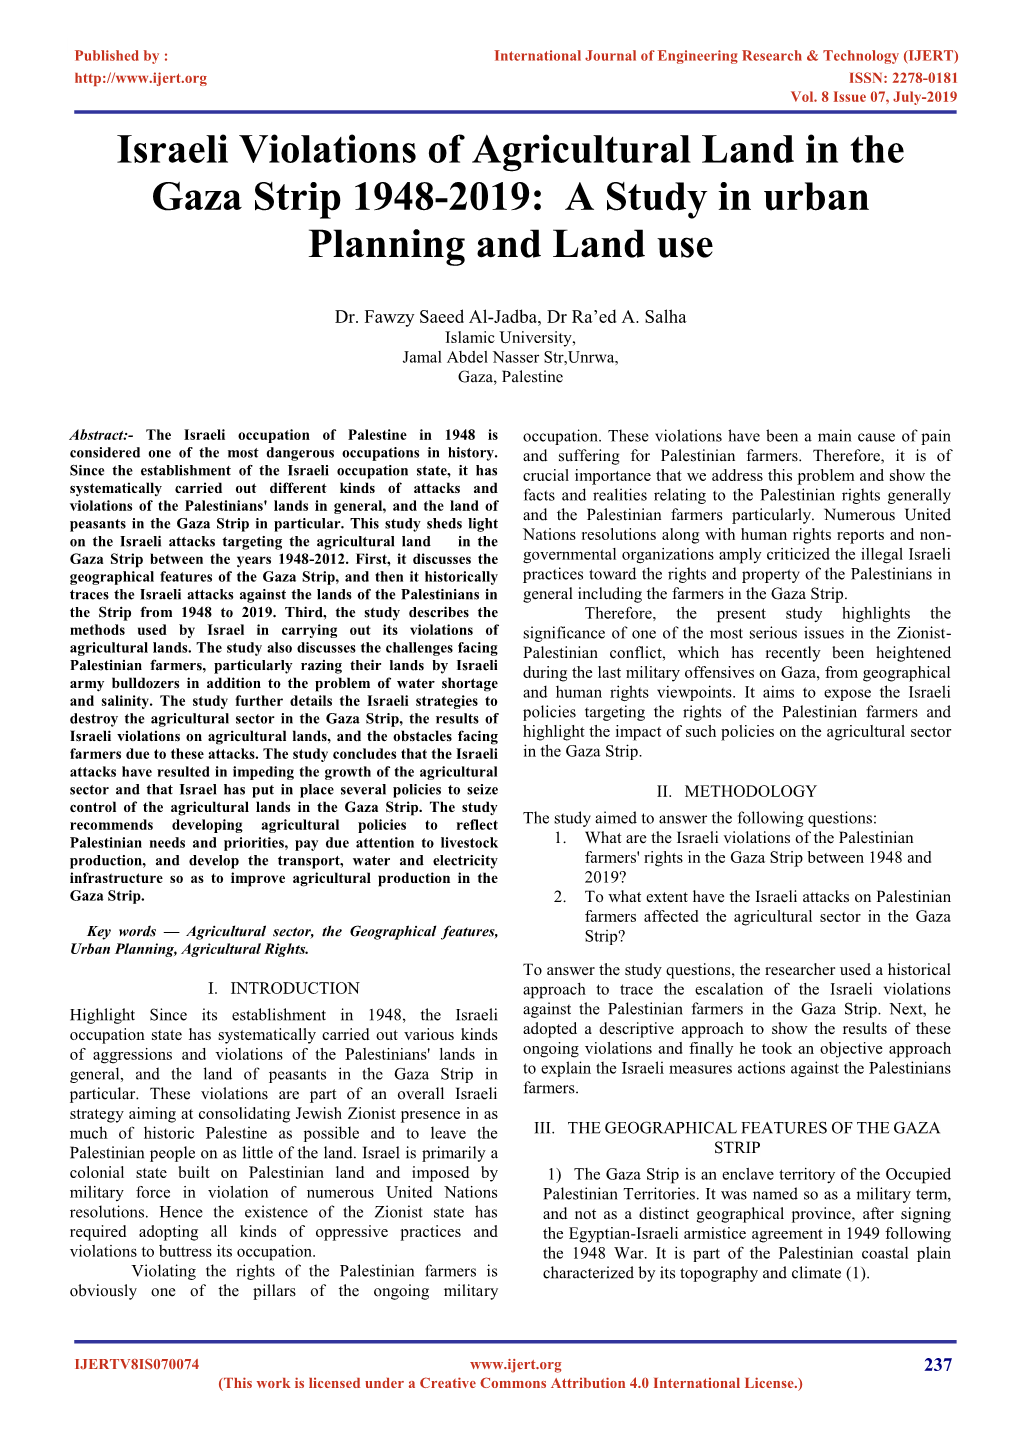 Israeli Violations of Agricultural Land in the Gaza Strip 1948-2019: a Study in Urban Planning and Land Use